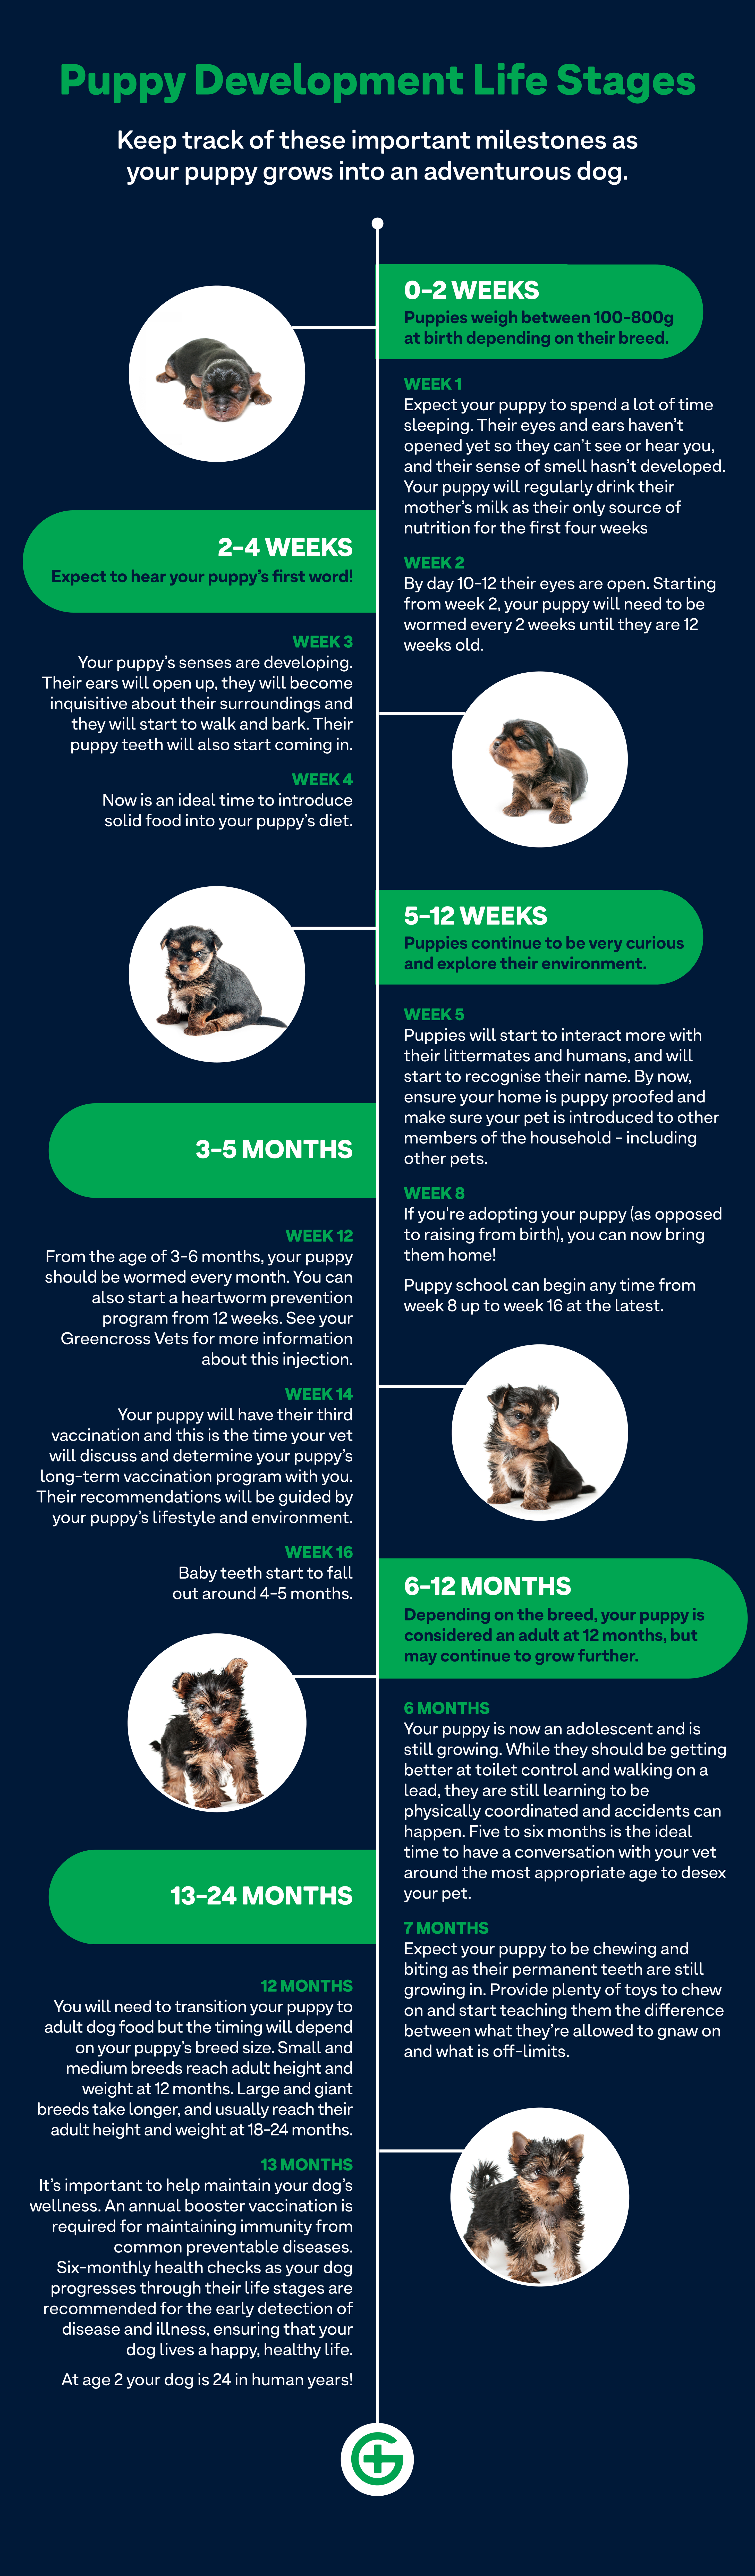 Infographic - Puppy Development Life Stages